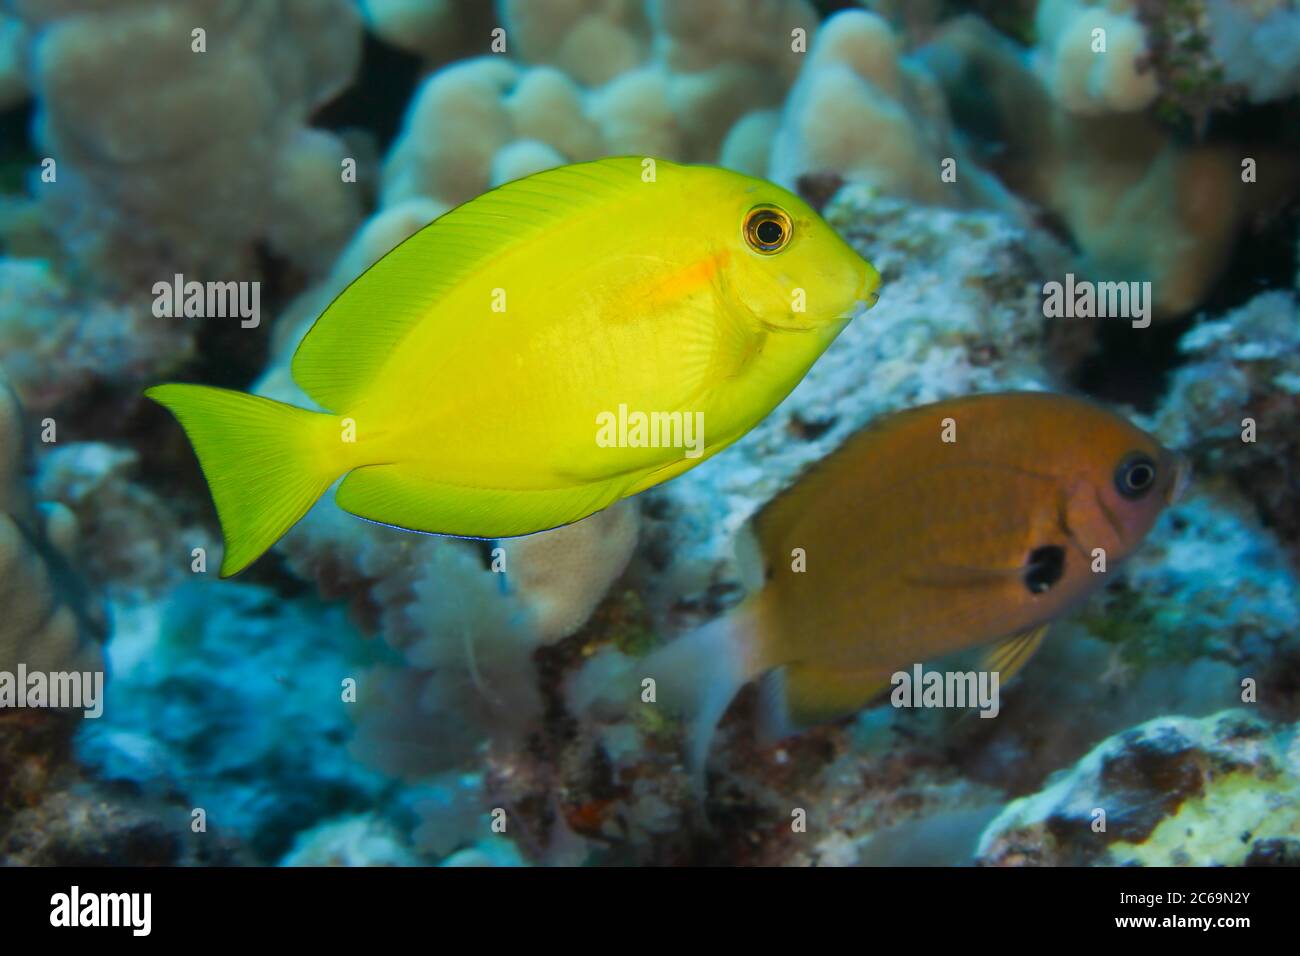 In Hawaii the juvenile orangeband surgeonfish, Acanthurus olivaceus, can sometimes be found on the reef with yellow tangs. The two are easily mistaken Stock Photo